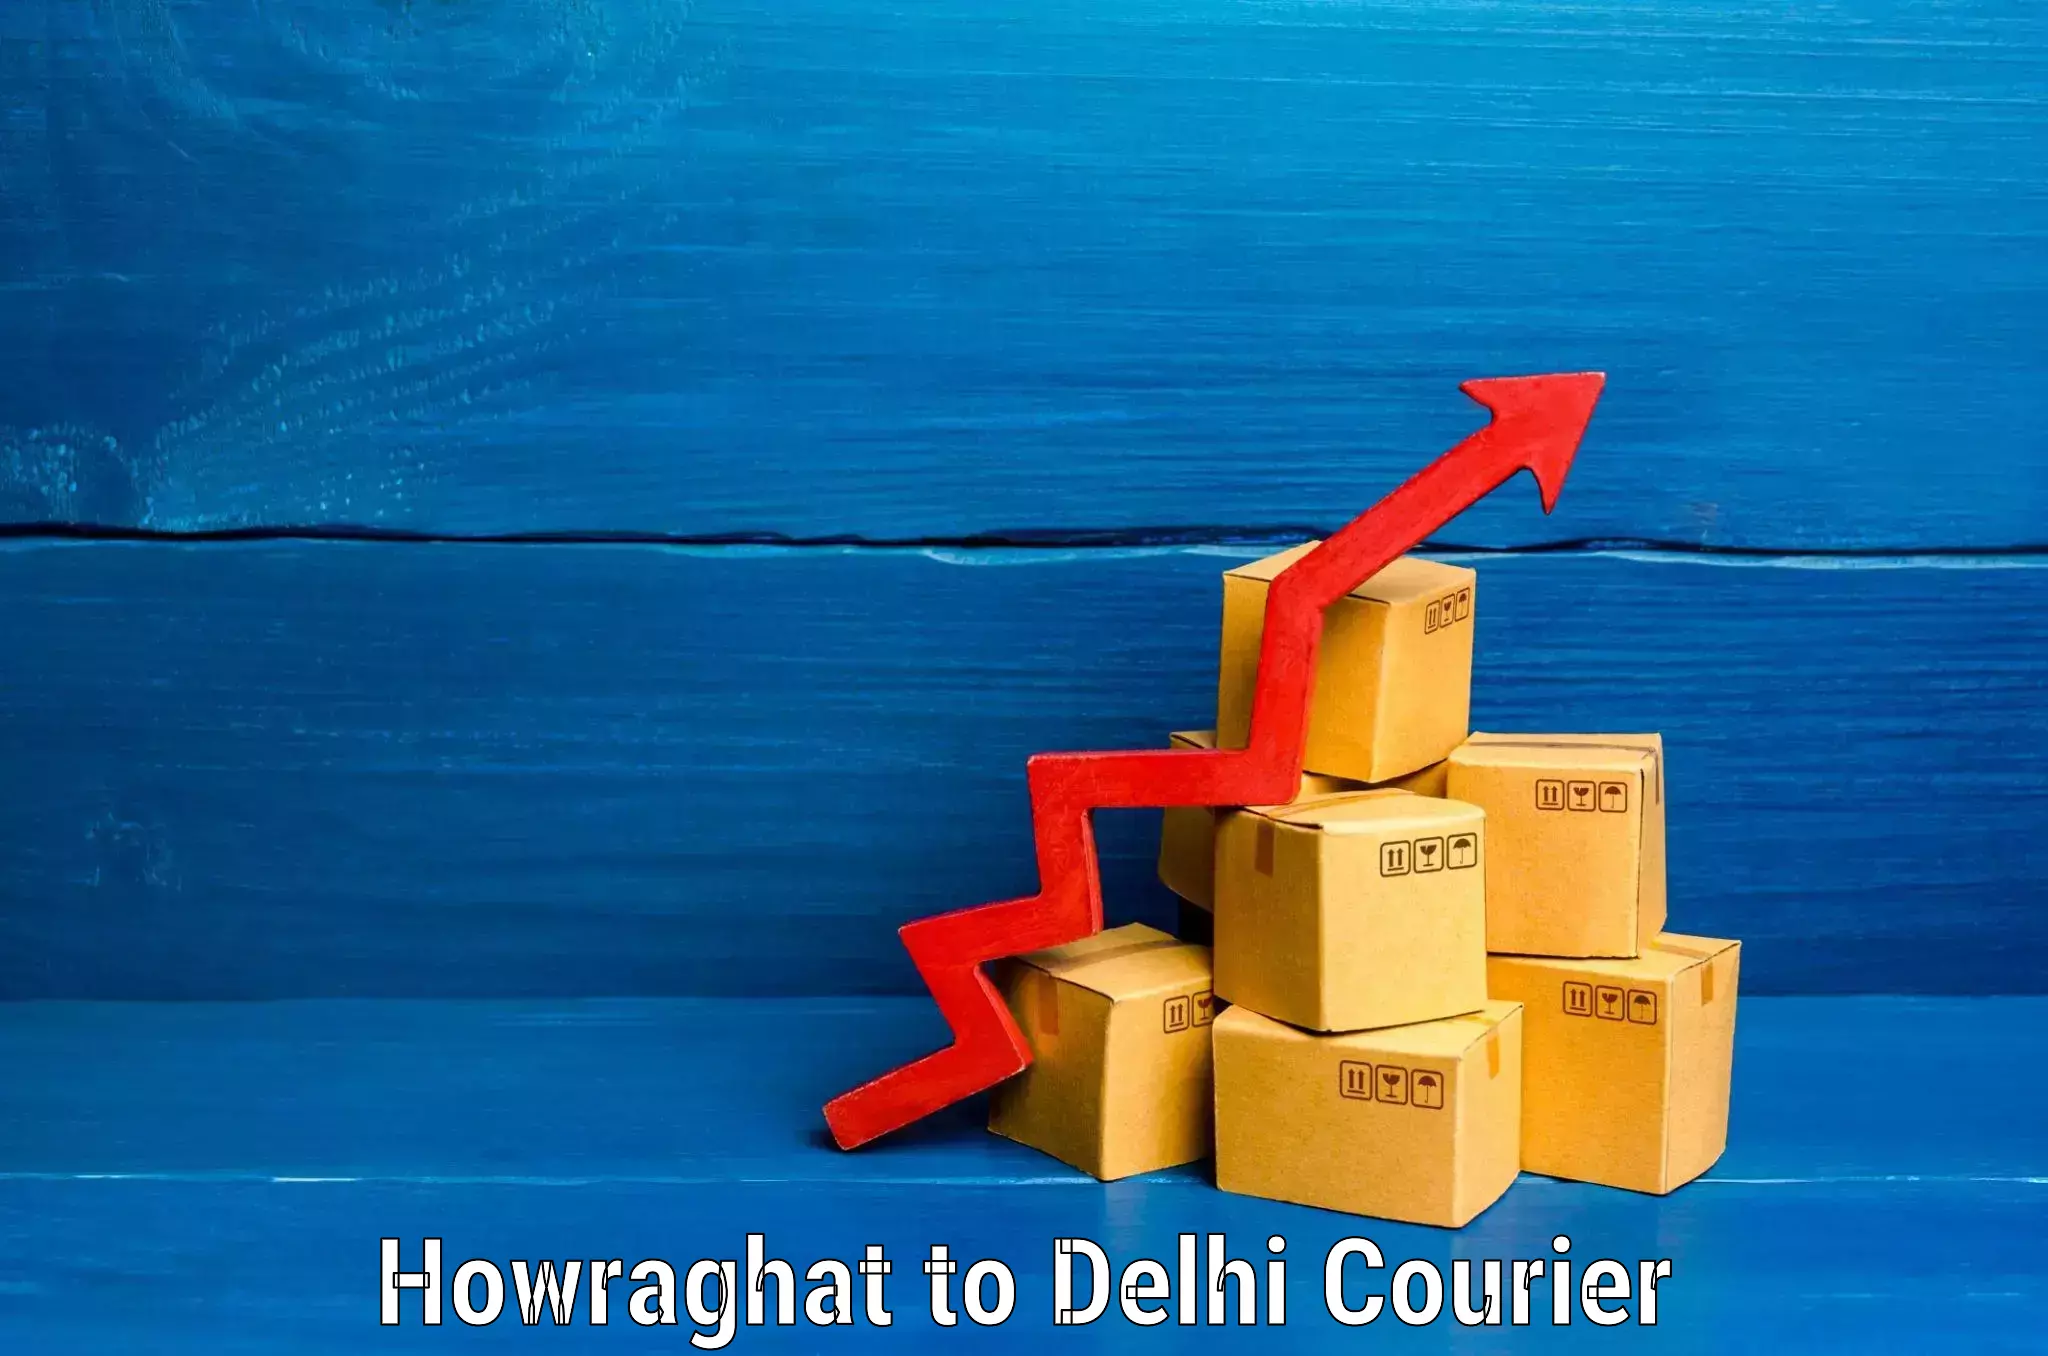 Automated luggage transport Howraghat to University of Delhi